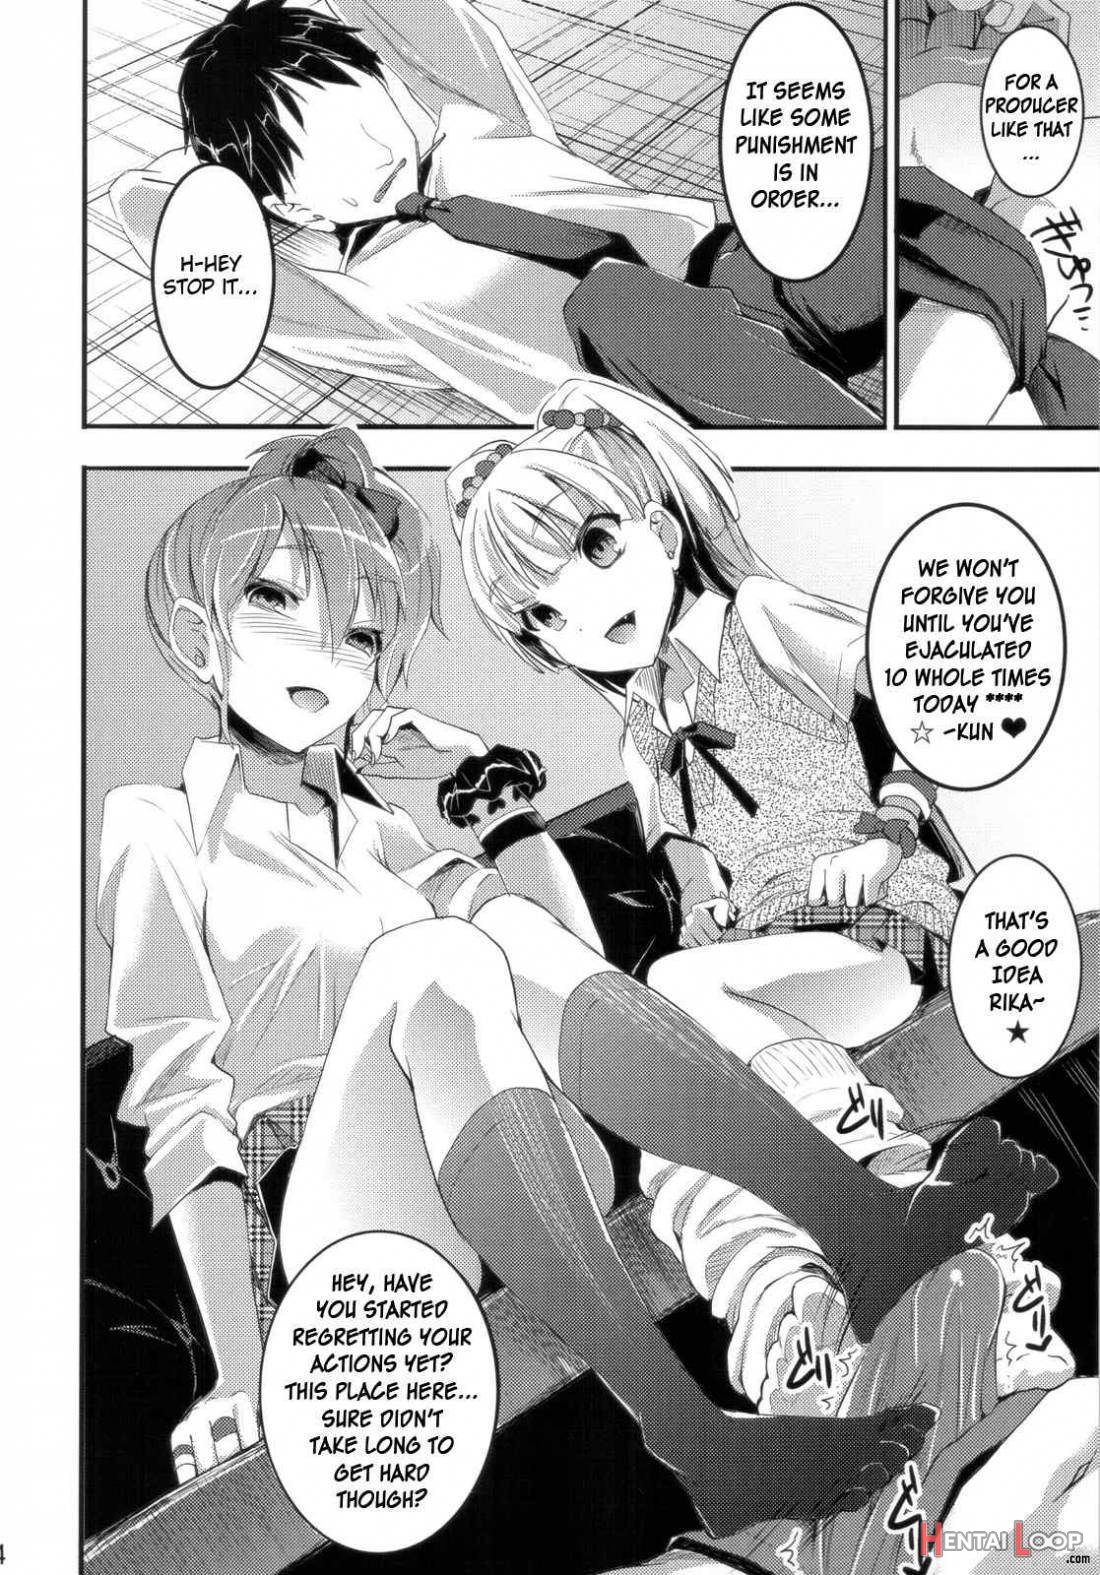 The Jougasaki Sisters’ All-out Love Attack + Omake page 3